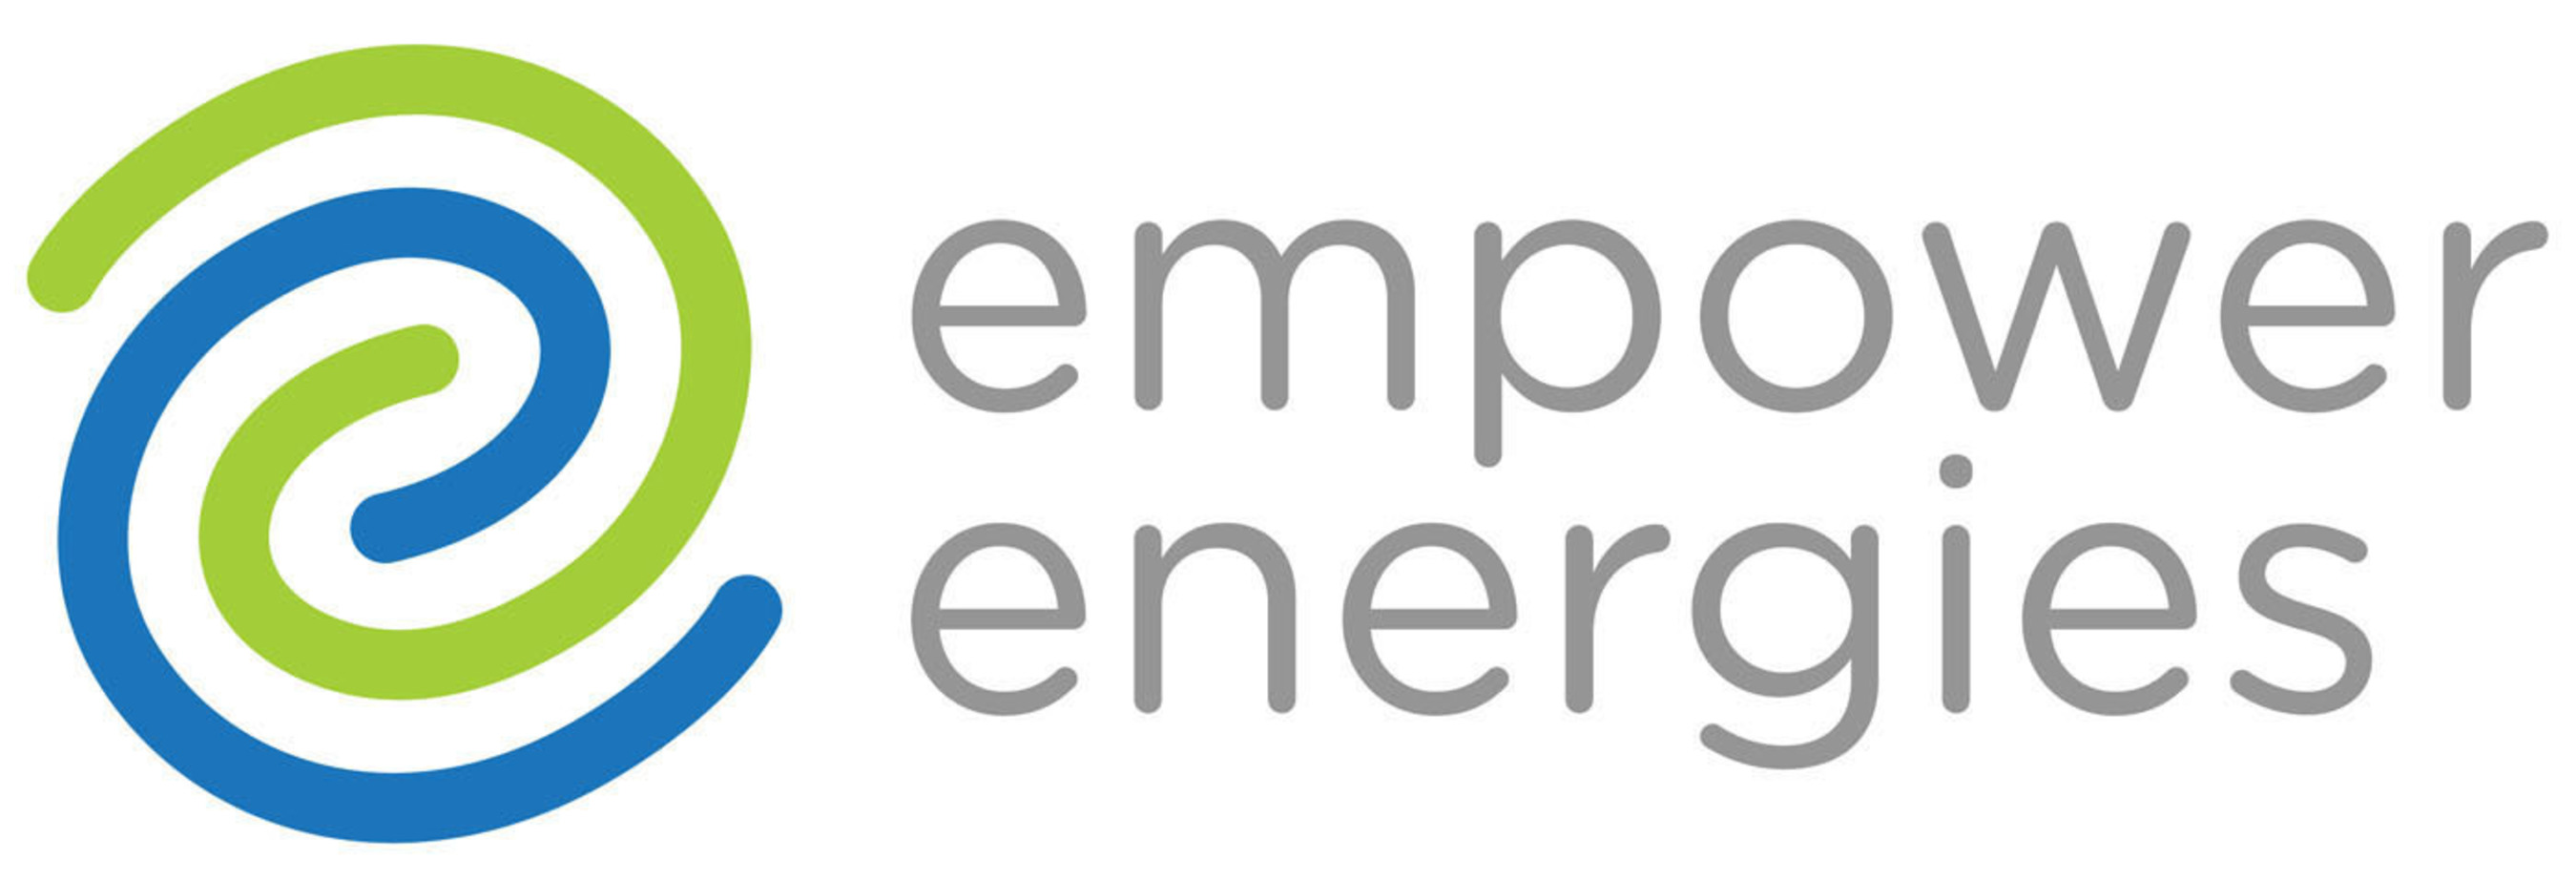 Empower Energies, Inc., headquartered in Troy, Michigan, is a renewable portfolio solutions provider focused on enterprise energy management, commercial-scale renewable energy, and clean transport infrastructure for General Motors and other customers, both in the United States and internationally. More information about Empower Energies can be found at www.empowerenergies.com. (PRNewsFoto/Empower Energies)